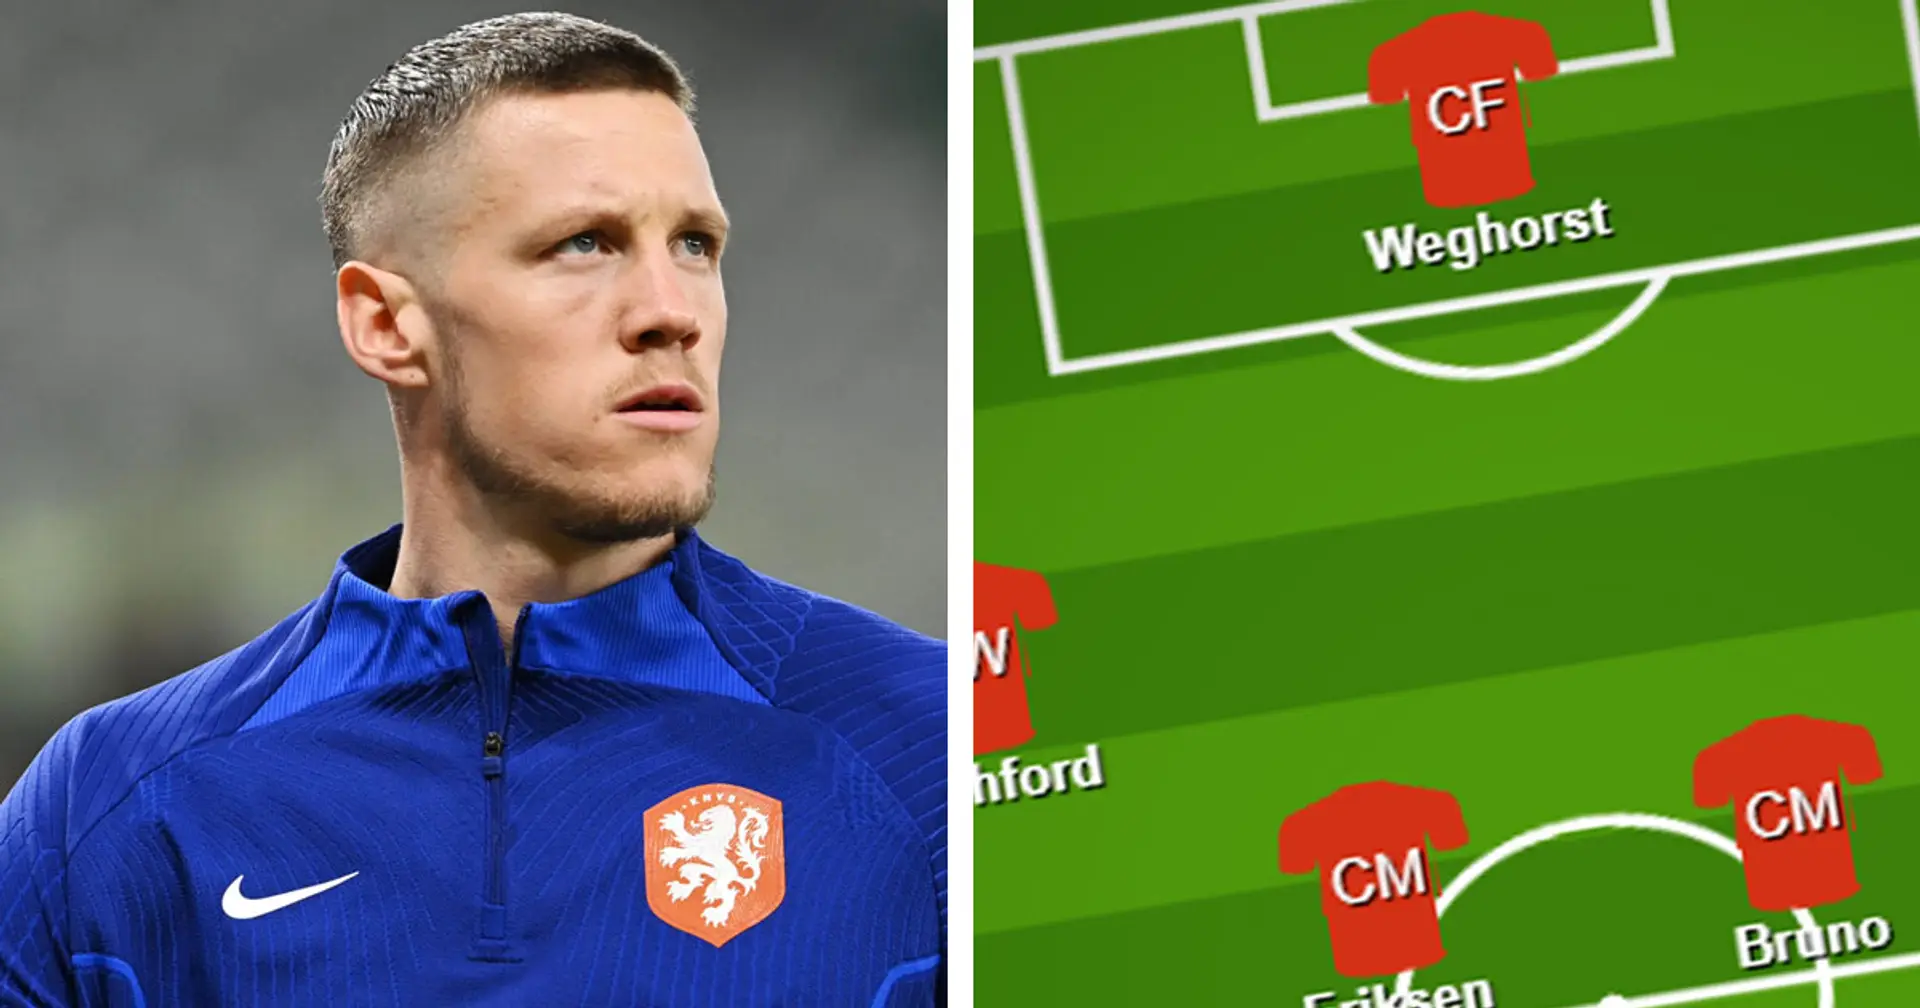 How can Man United line up against Man City with Weghorst? Shown in pic